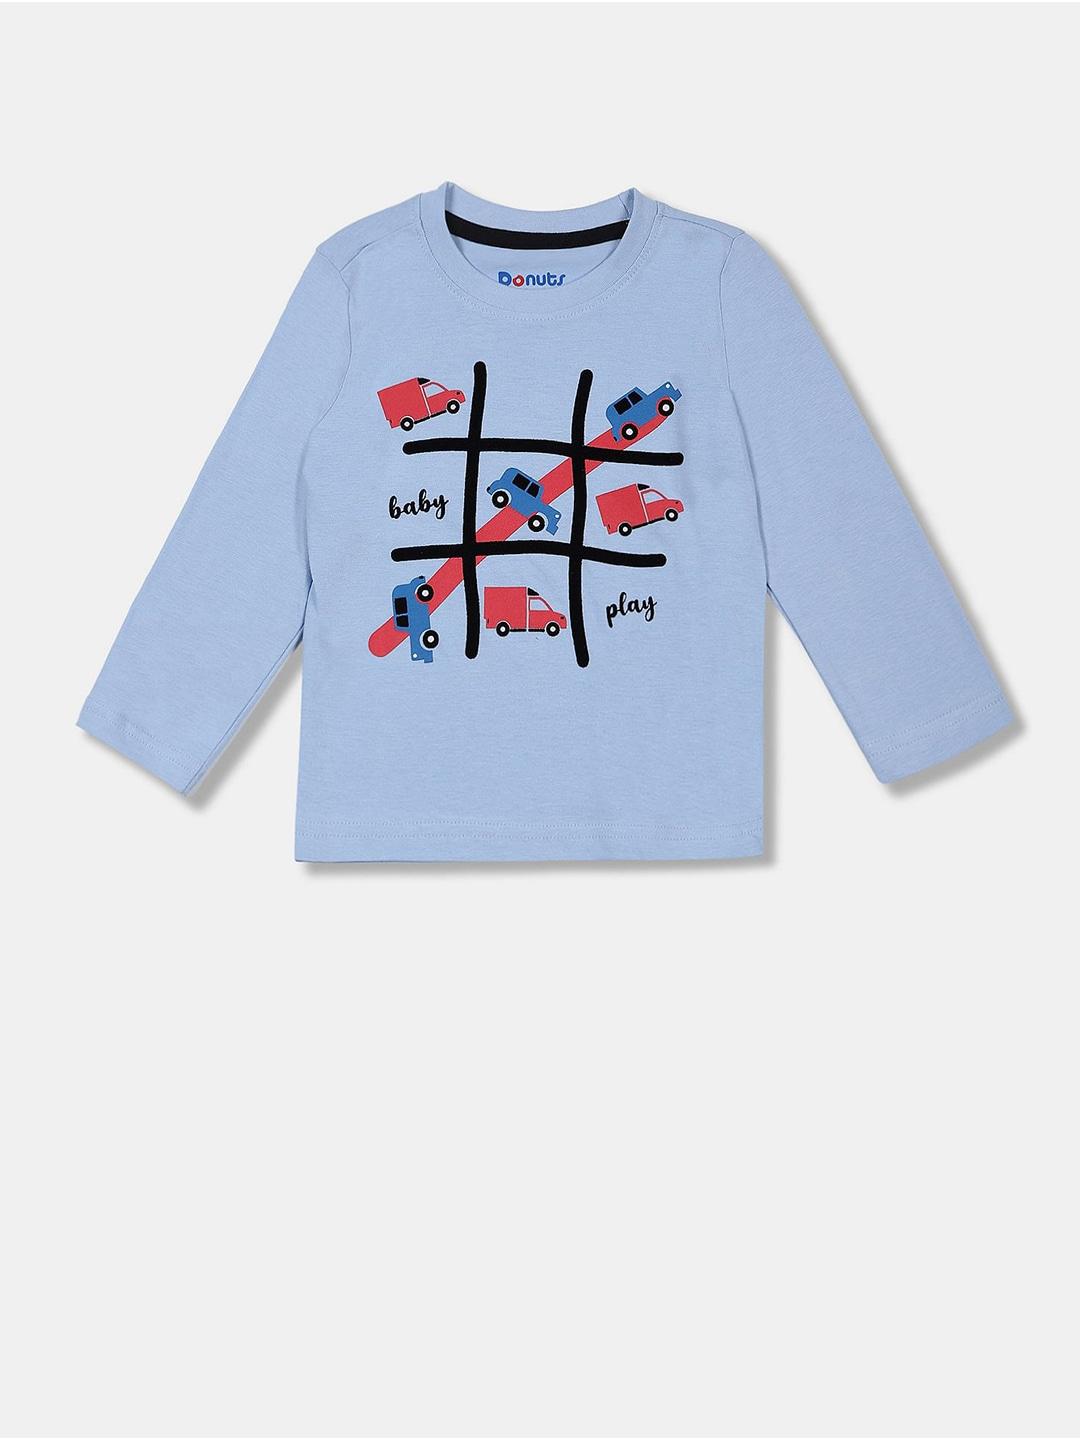 Donuts Boys Blue Graphic Printed Long Sleeve Cotton T-shirt